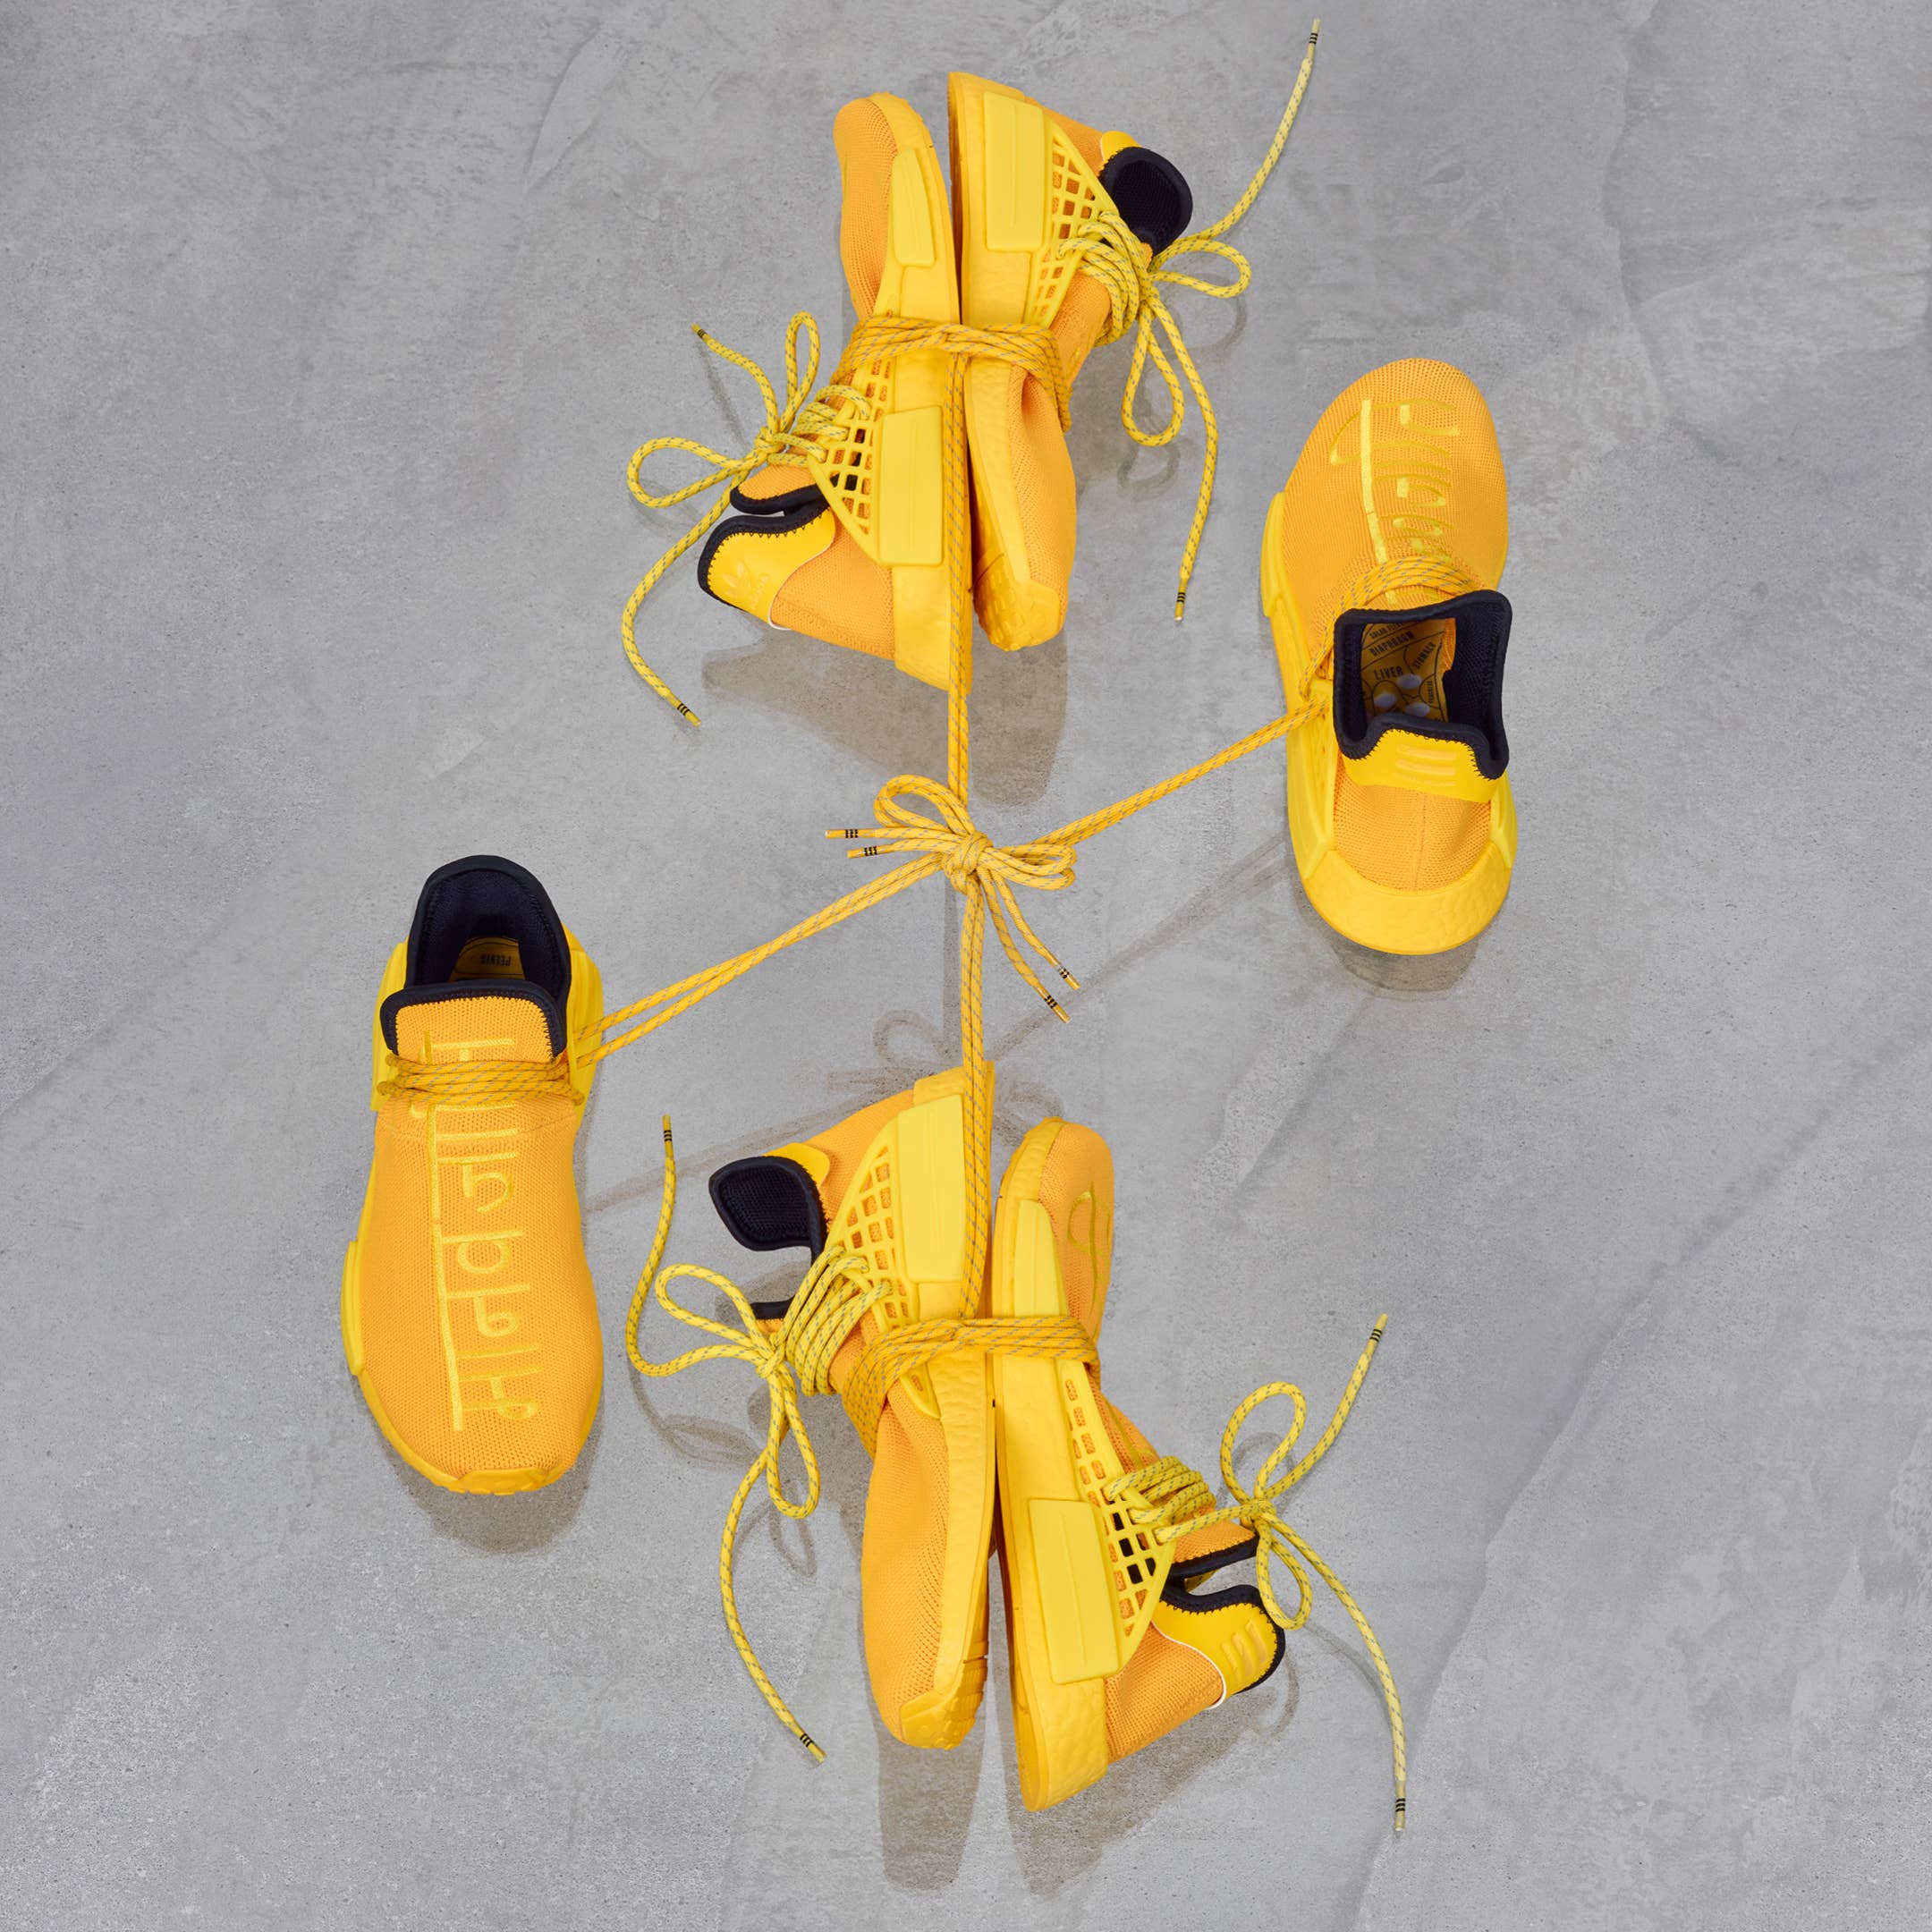 Adidas and Pharrell to Release 'Shock Yellow' Humanrace Sneakers